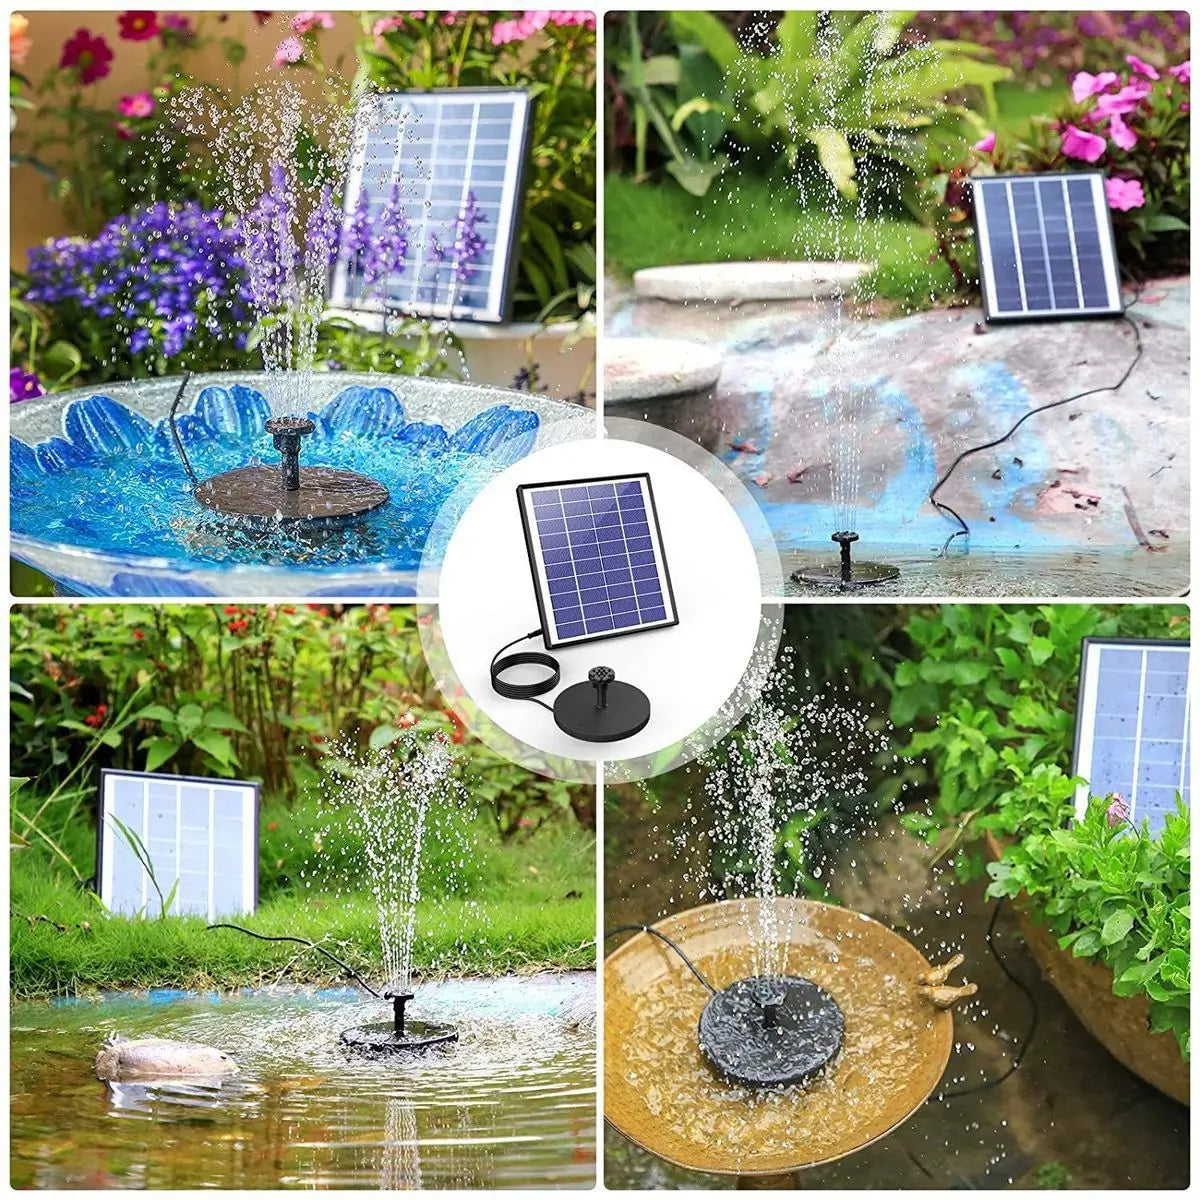 12V Solar Panel Charging Water Pump Set, Compact solar-powered water pump for small ponds, gardens, or fountains.